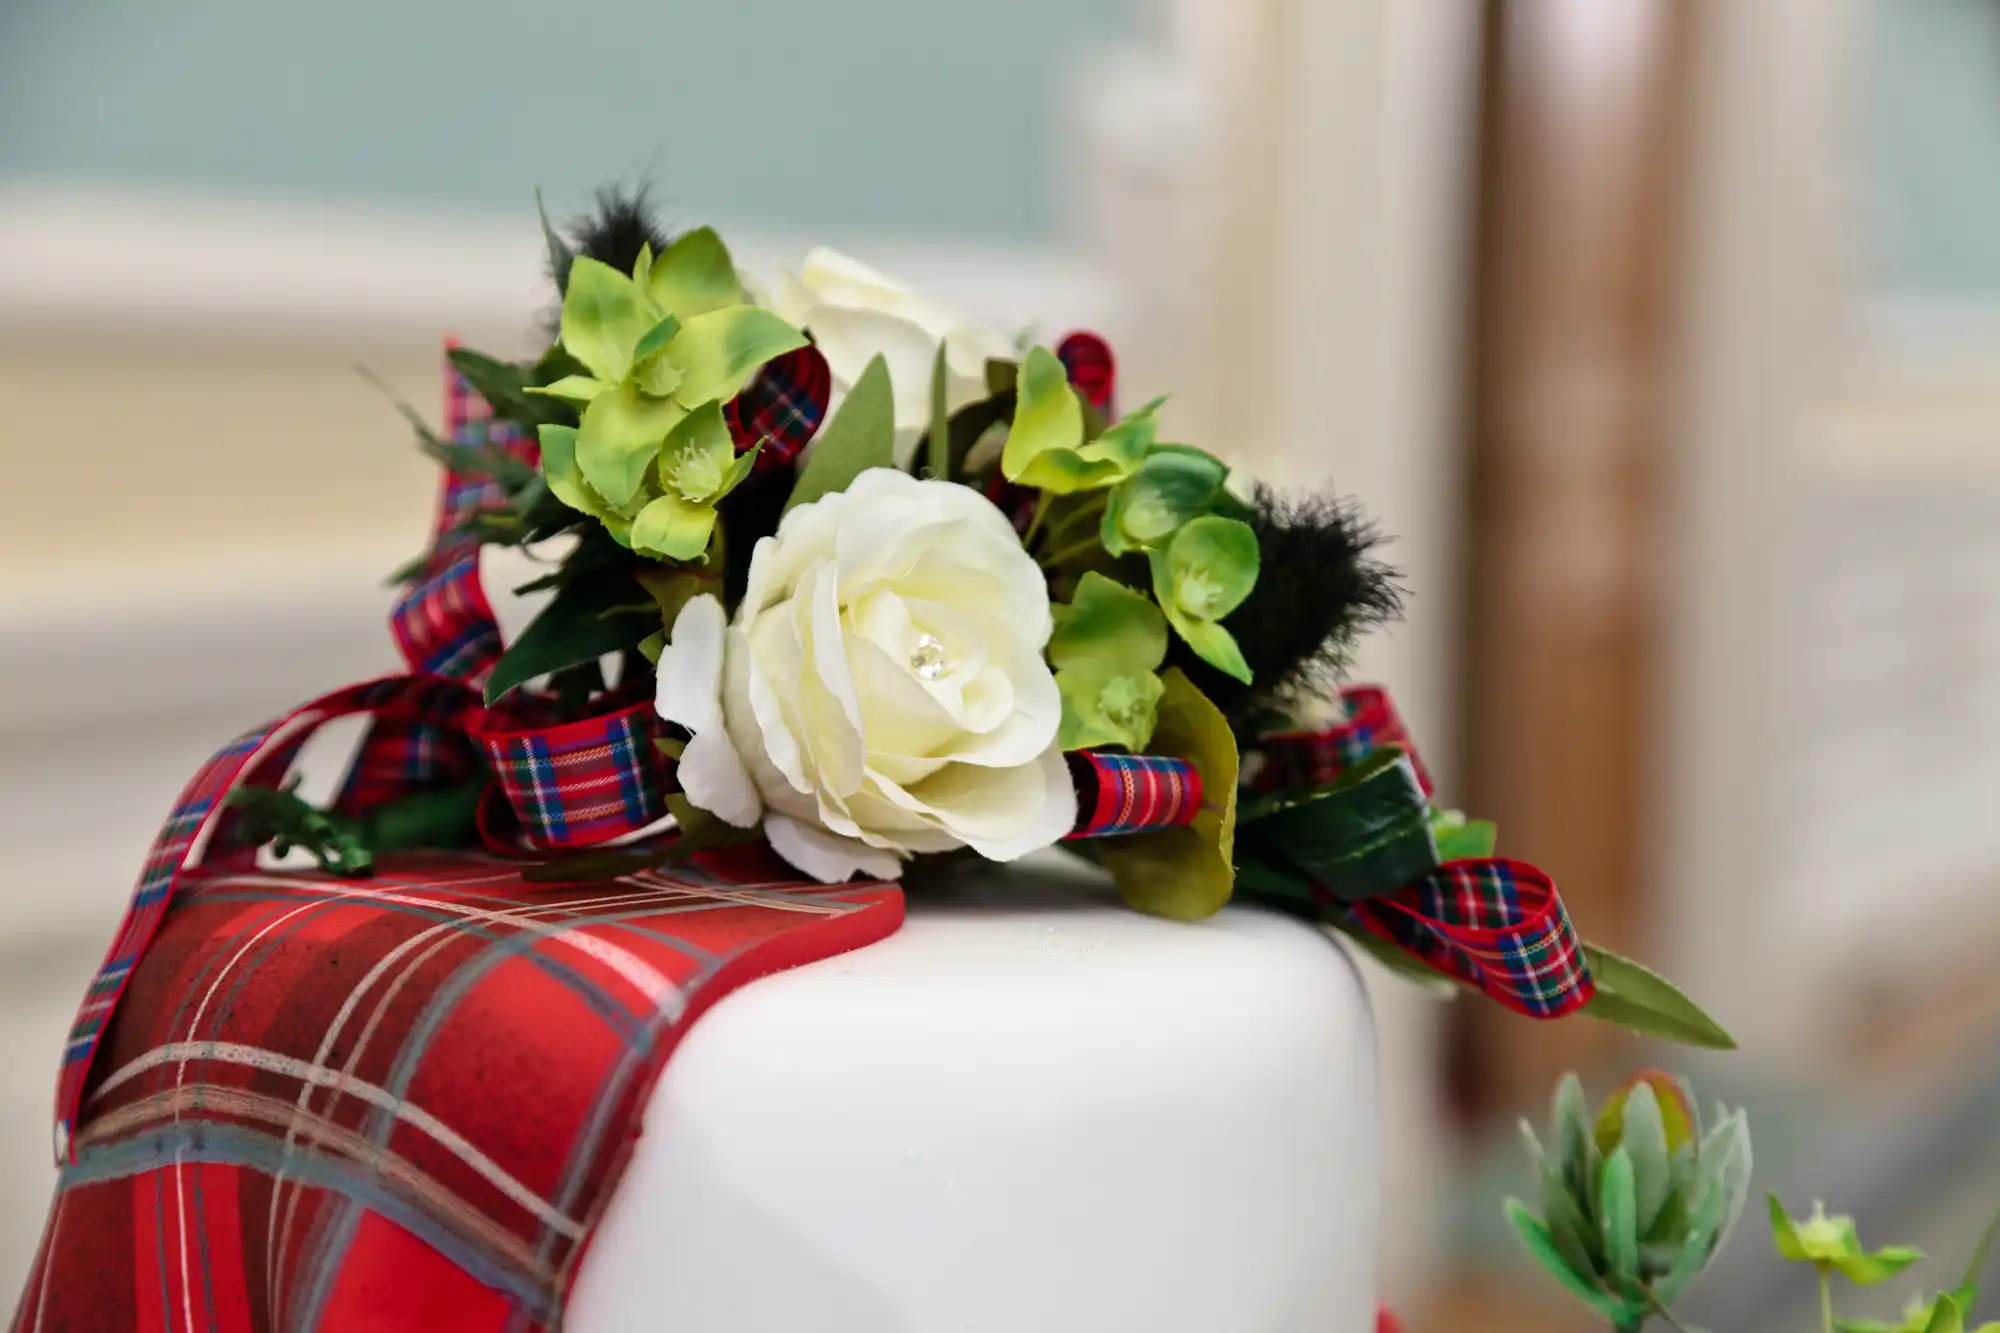 A bouquet of white flowers and greenery wrapped with a tartan ribbon, placed atop a red plaid gift box.